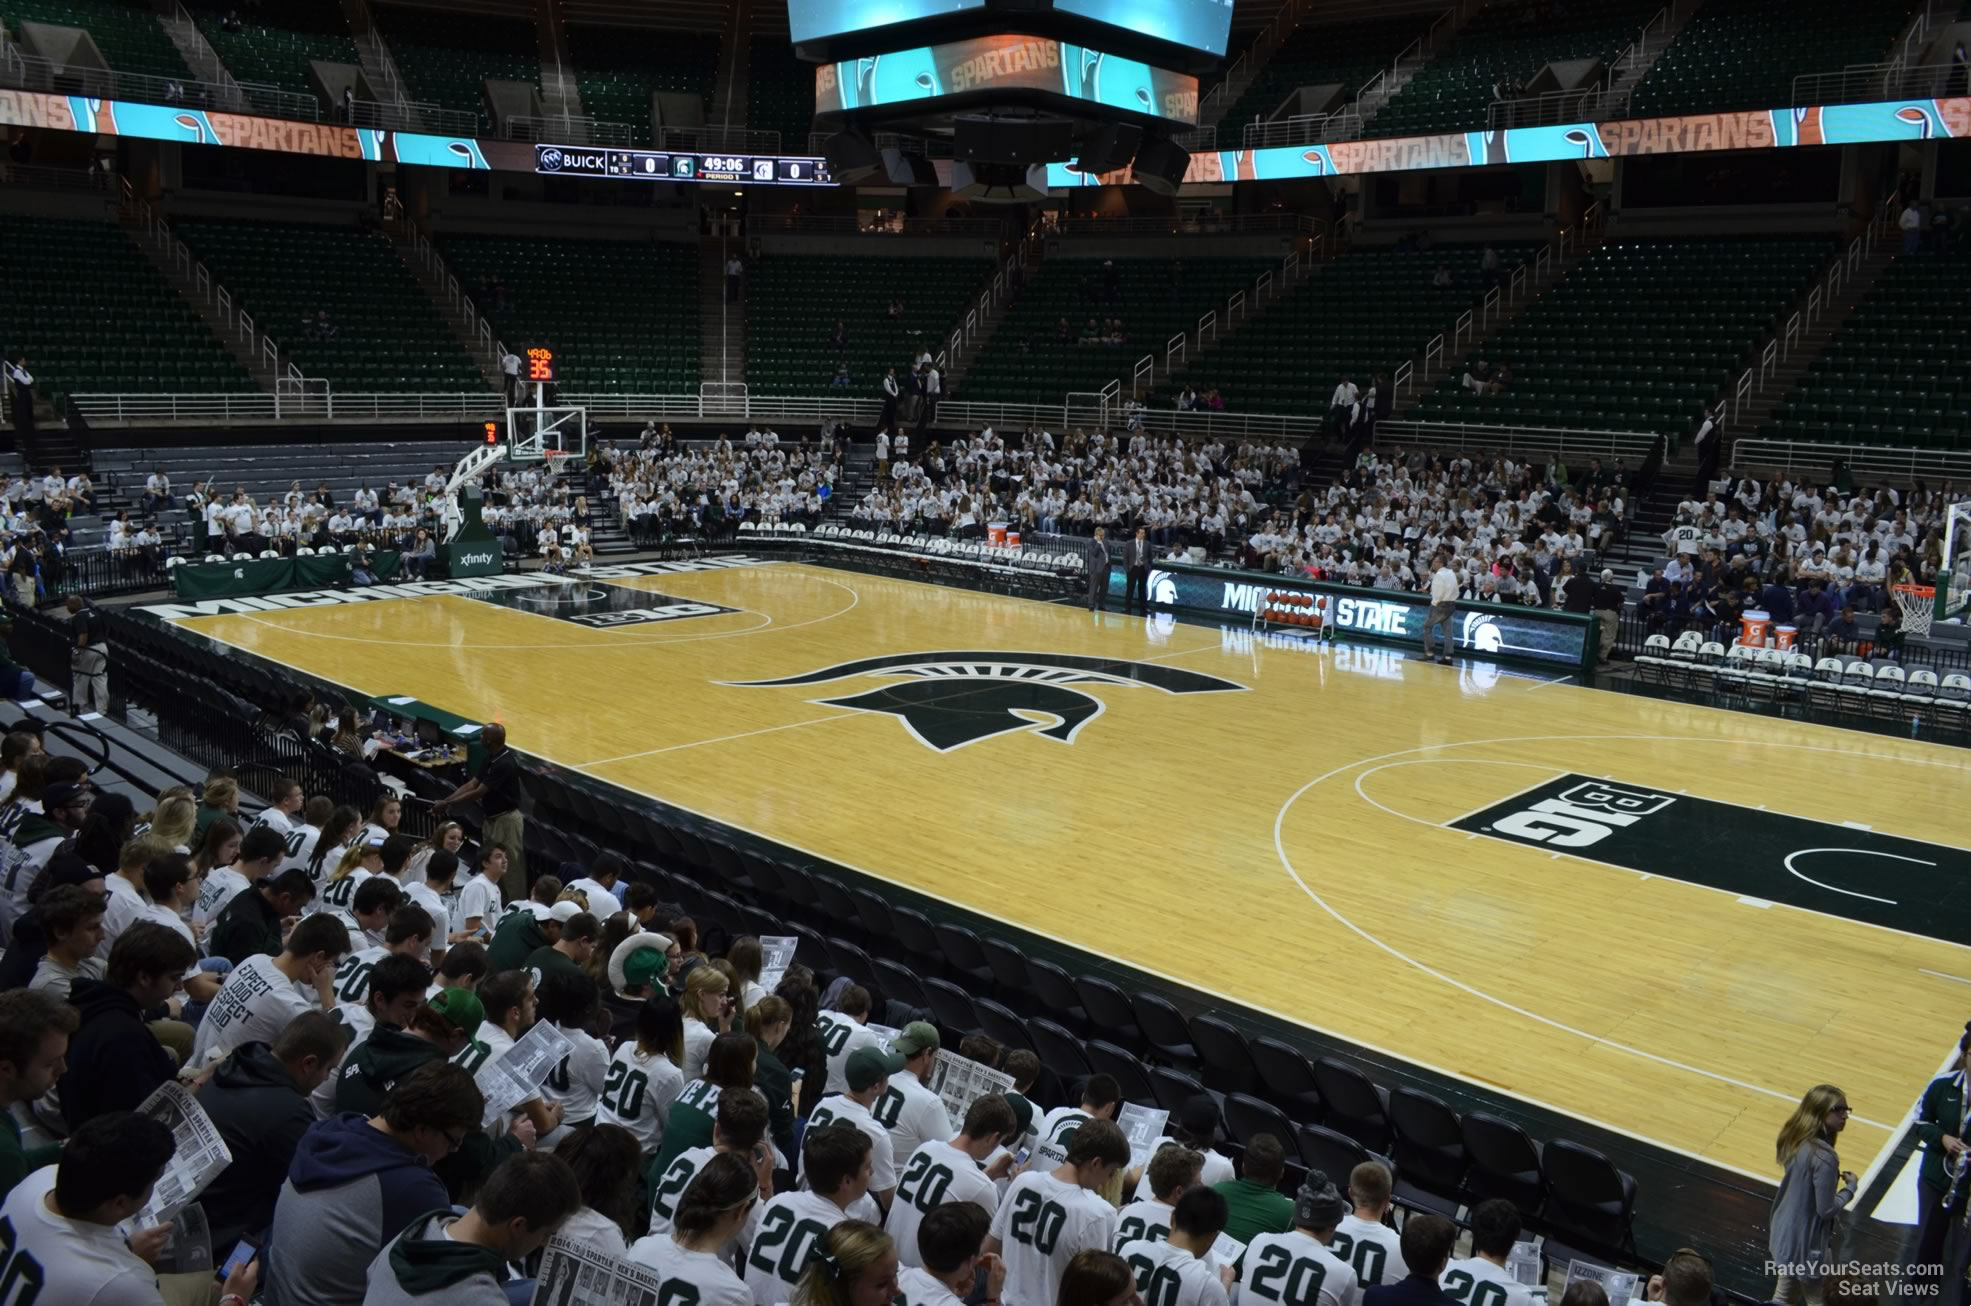 section 126, row 13 seat view  - breslin center